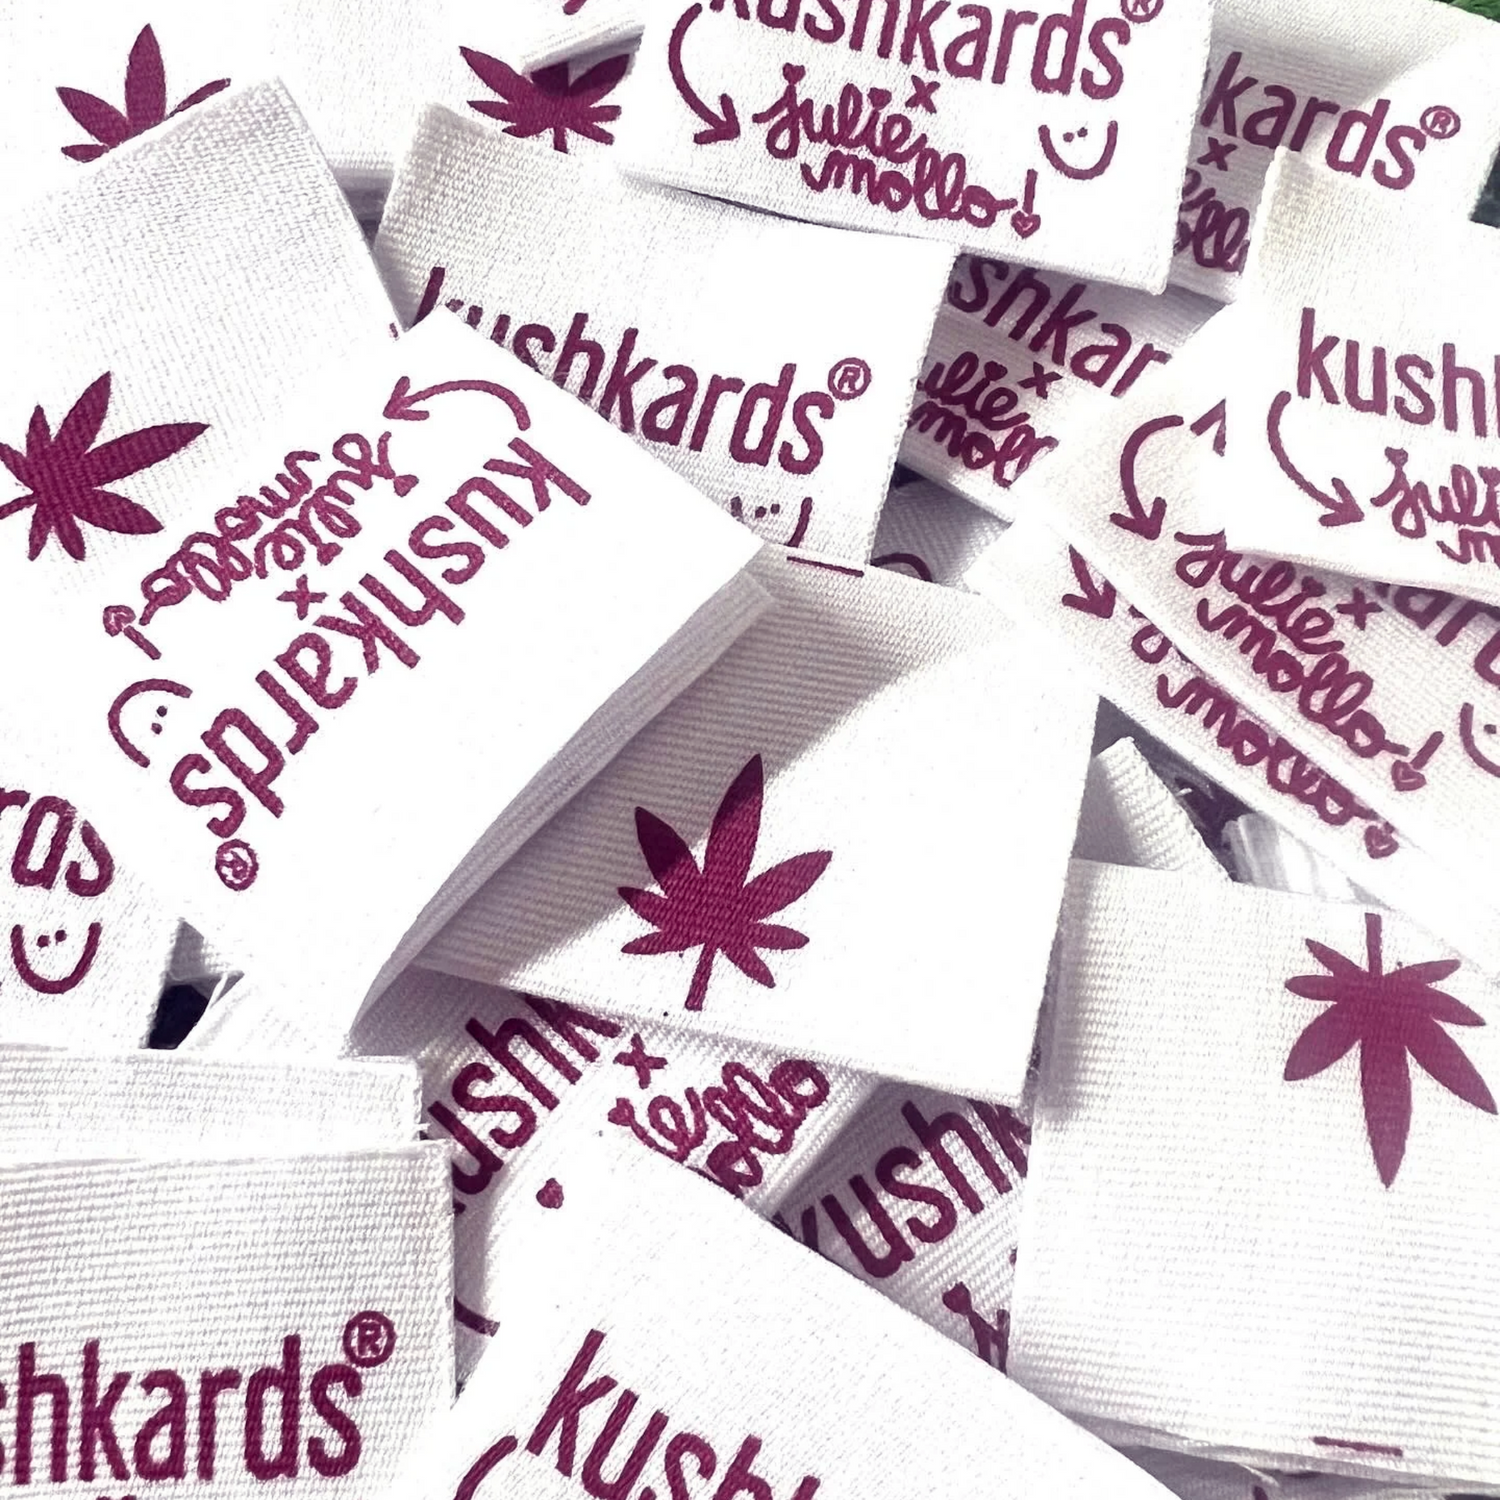 Close-up of custom clutch tags from KushKards, showcasing the collaboration with Julie Mollo.